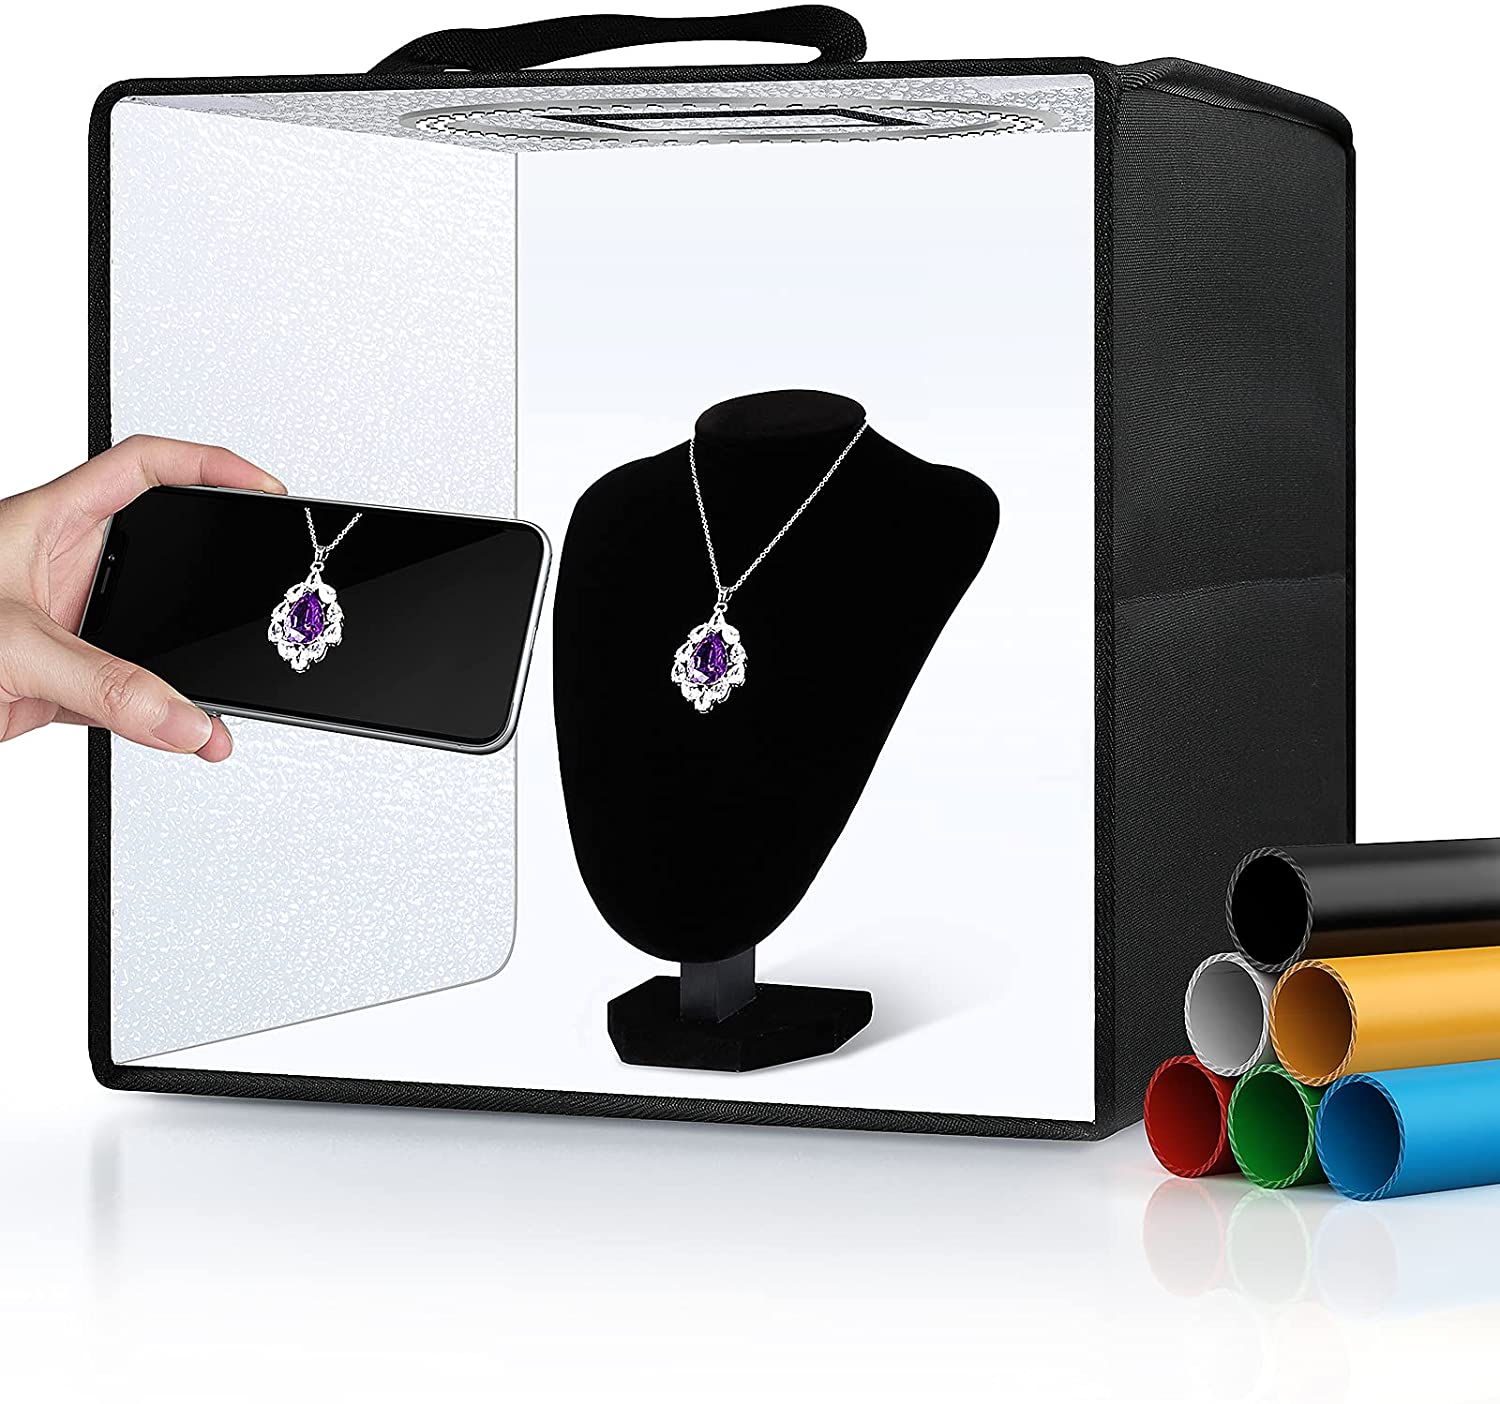 Portable Photo Studio on Amazon that you could purchase